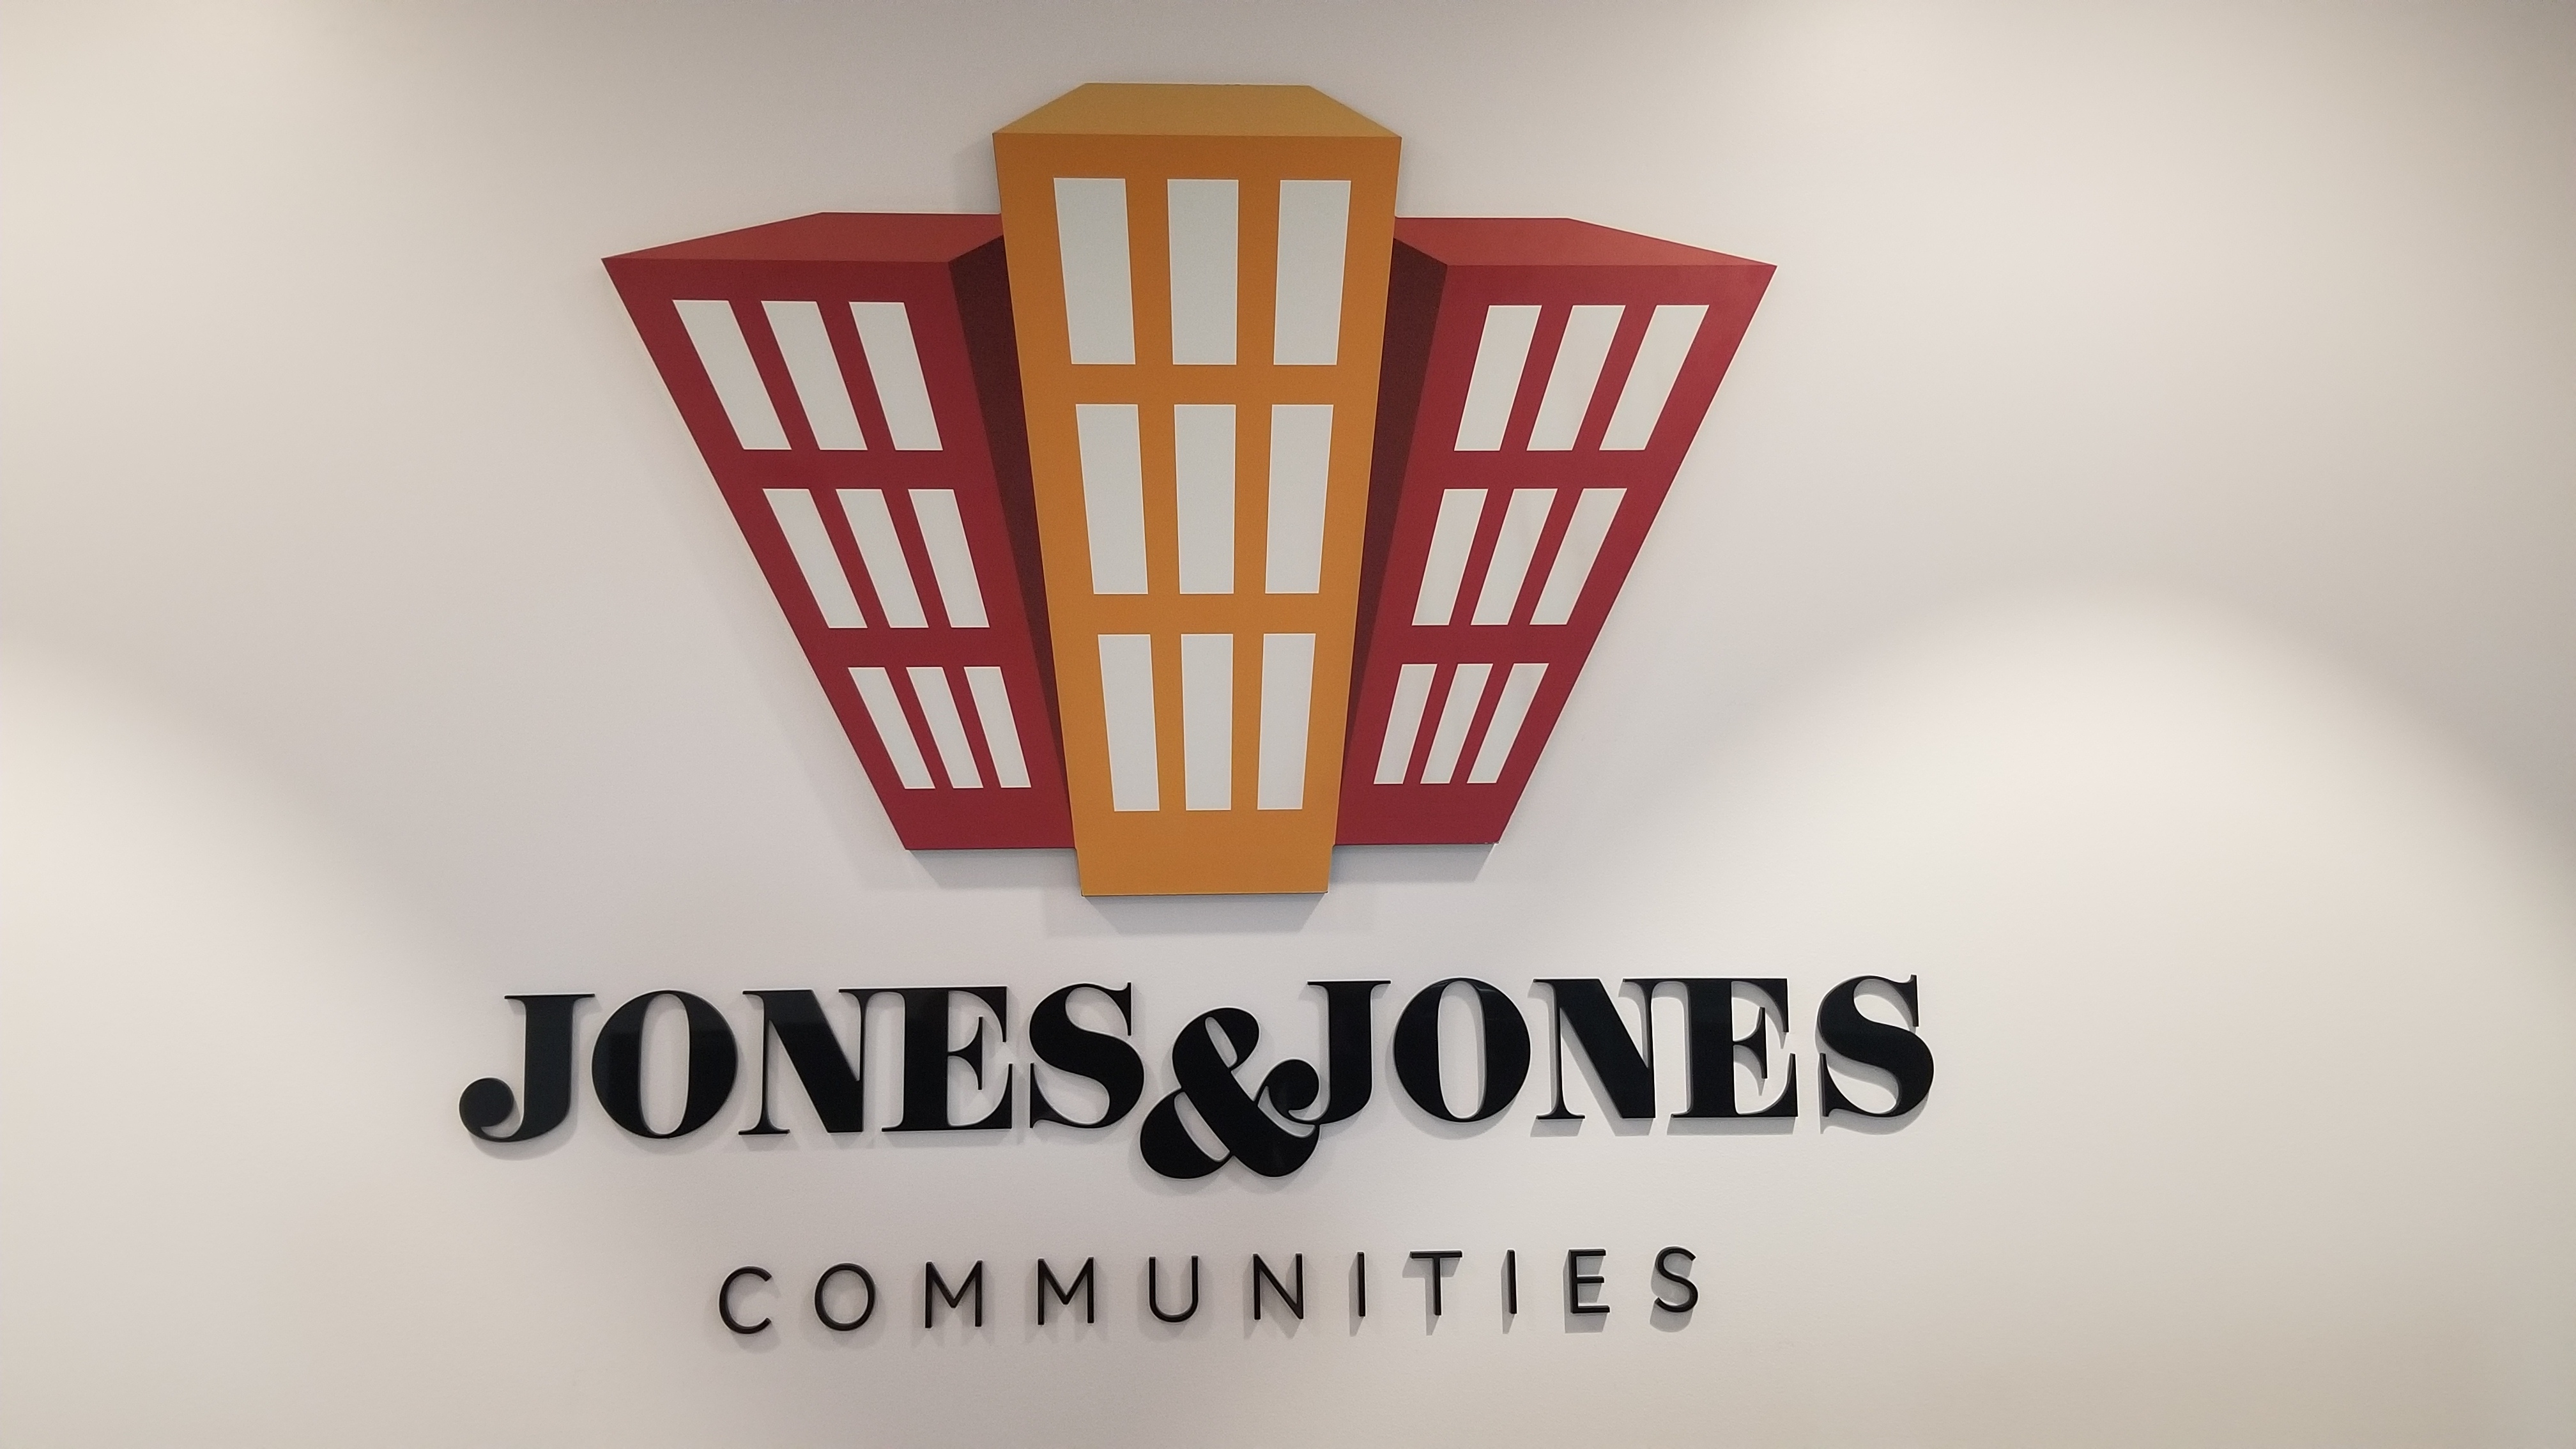 This is the acrylic conference room lobby sign we fabricated and installed in Jones and Jones' Malibu office conference room.